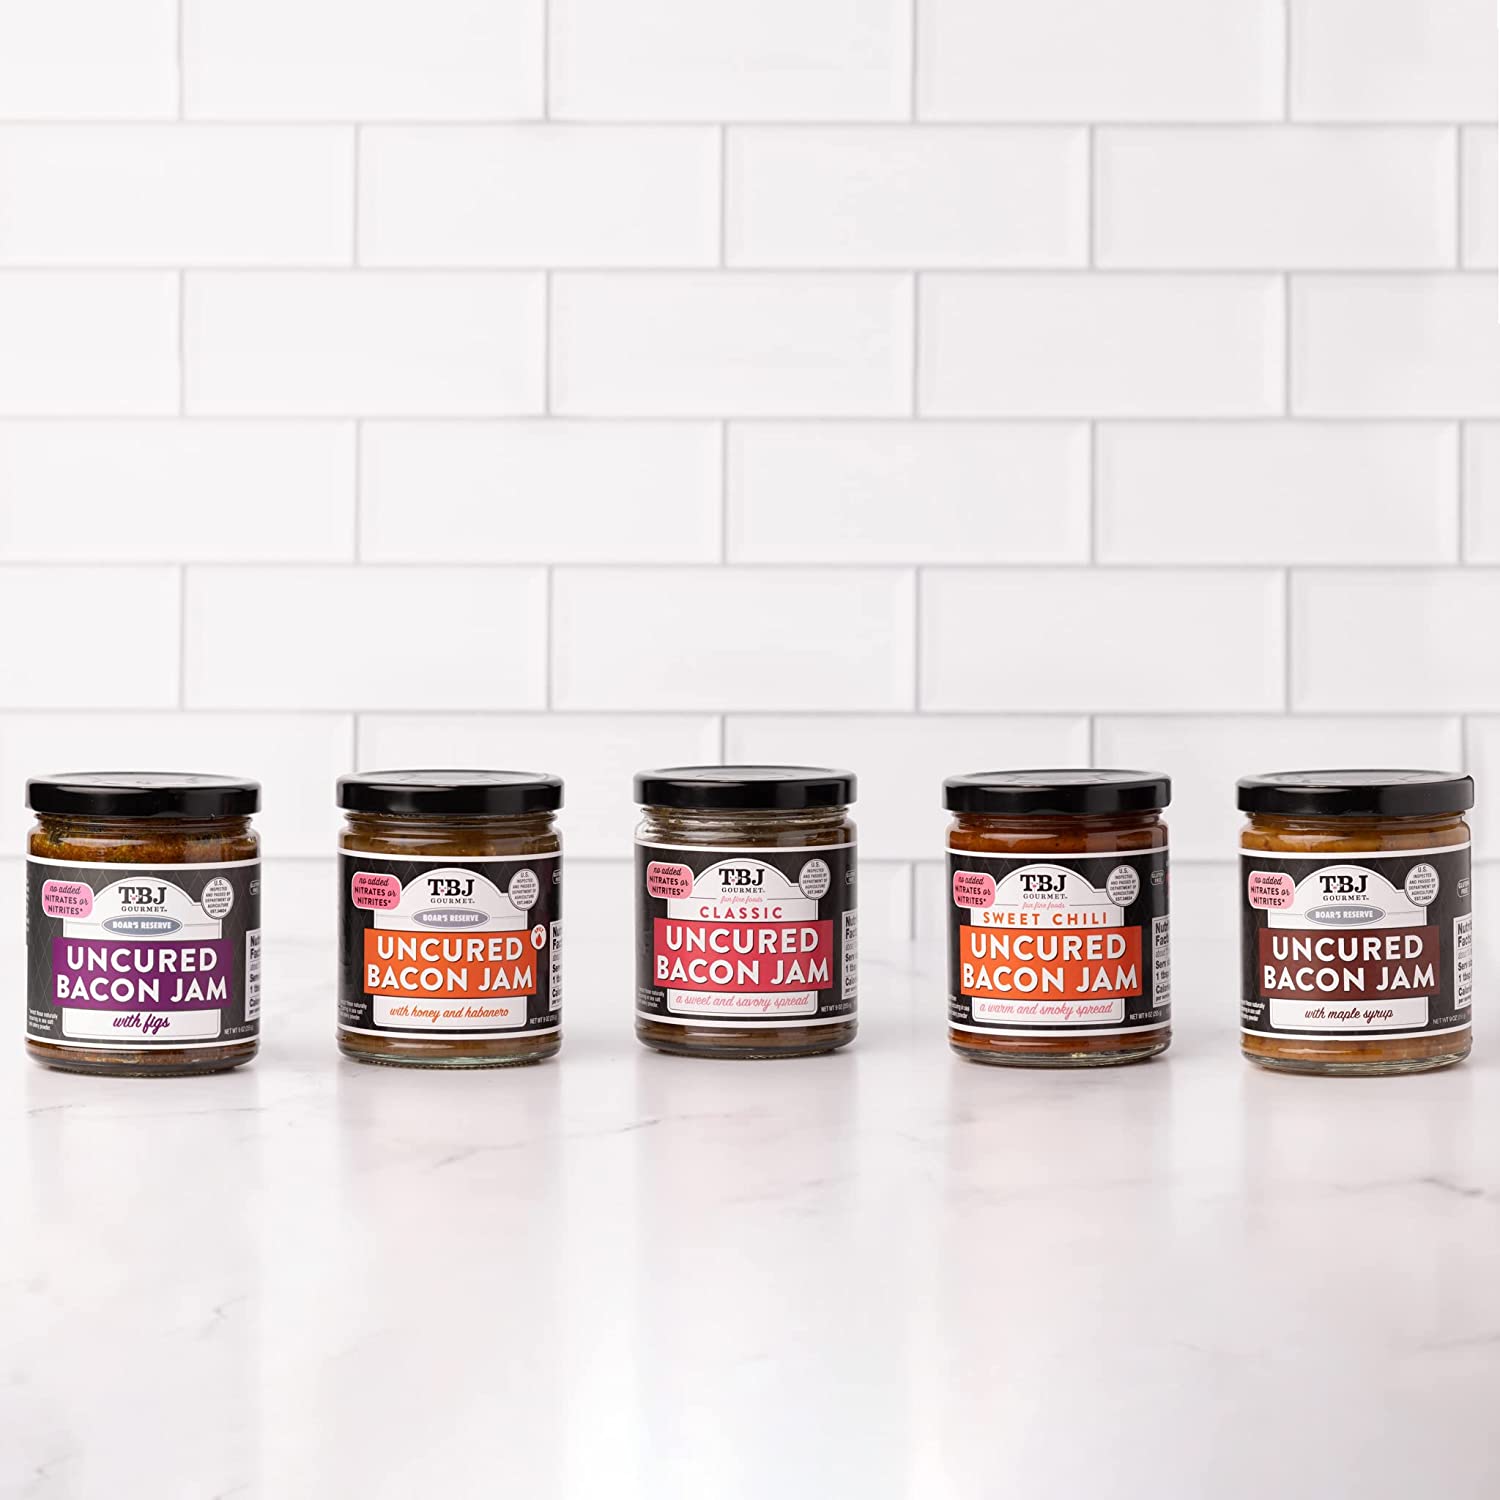 Five jars of different flavored bacon jams.